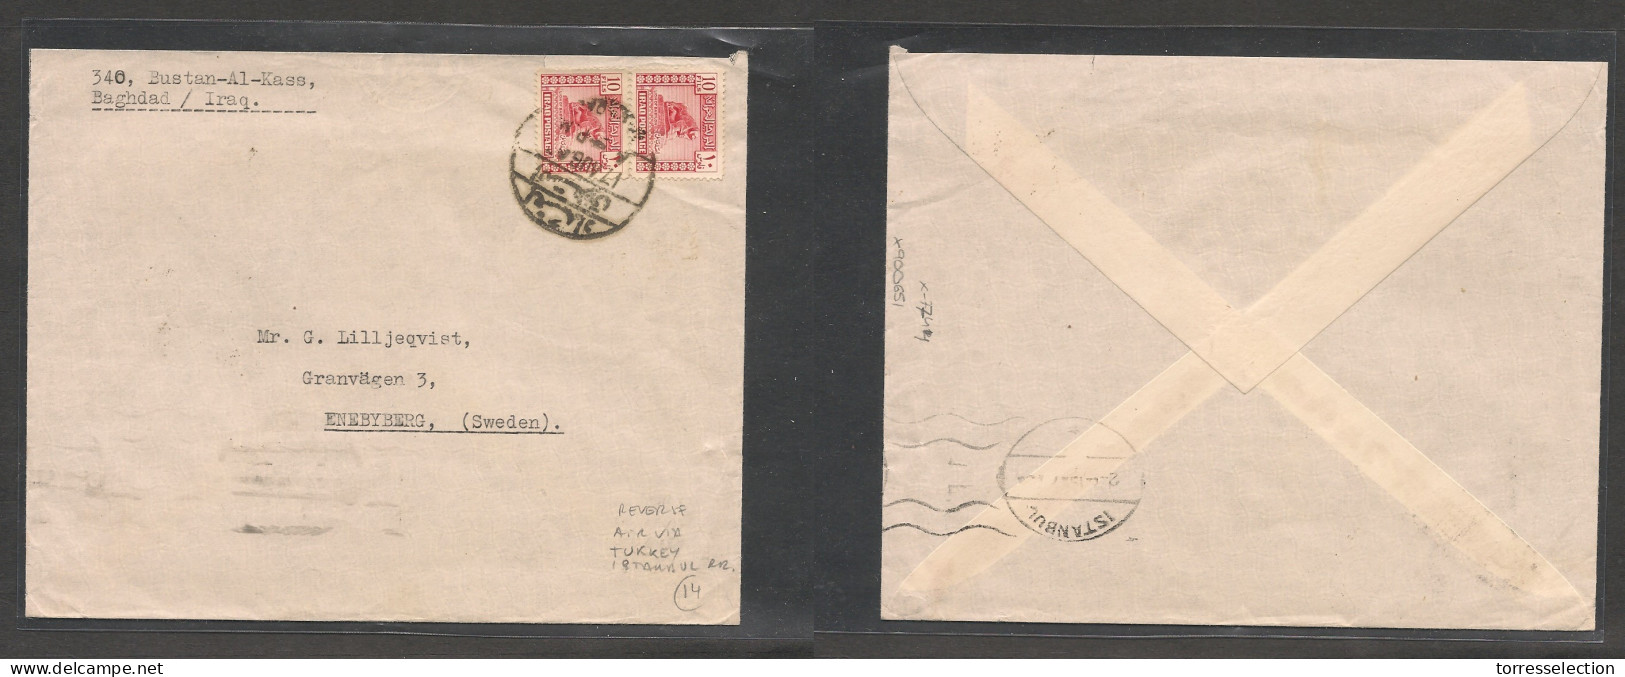 IRAQ. Iraq Cover - 1947 Bagdad To Sweden Enebyberg Mult Fkd Env, Carried Via Air Turkey Istanbul. Ver Interesting Early  - Irak